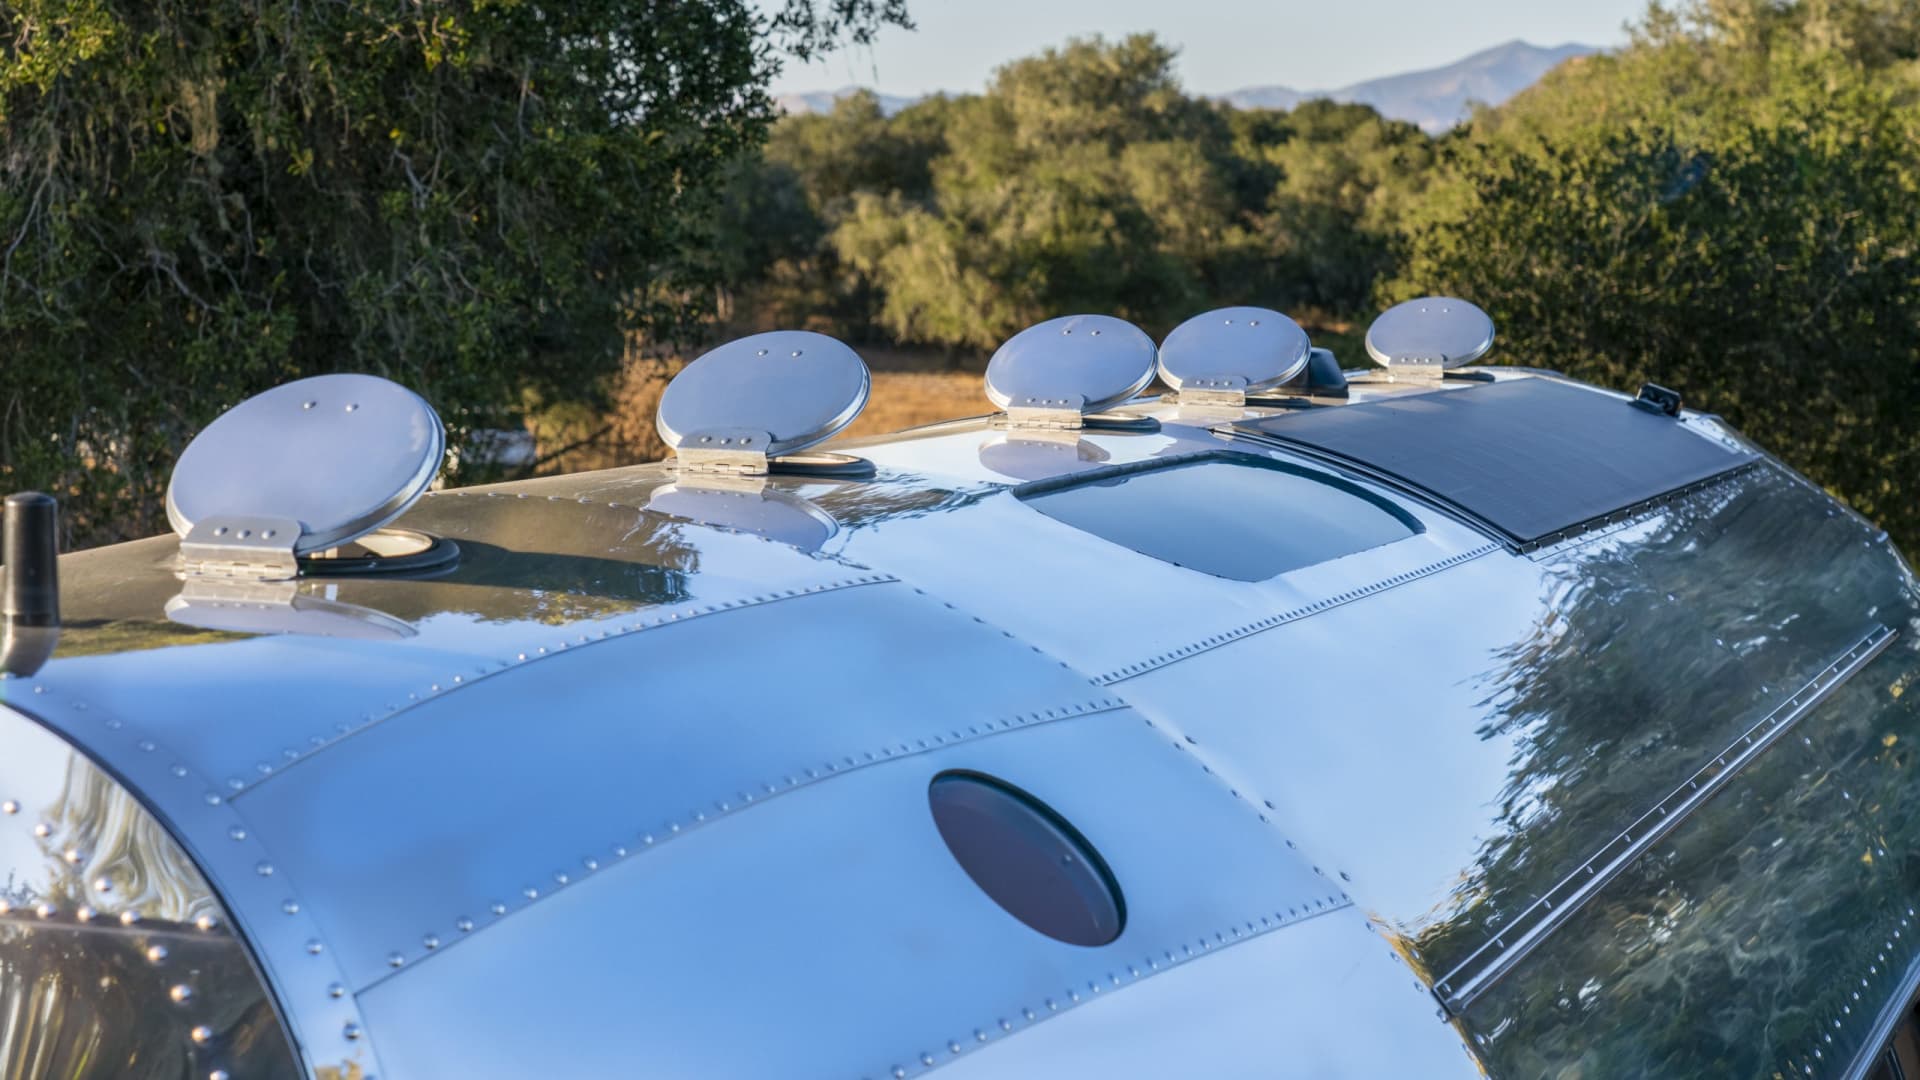 The Volterra features AeroSolar solar panels so you can charge the RV remotely.